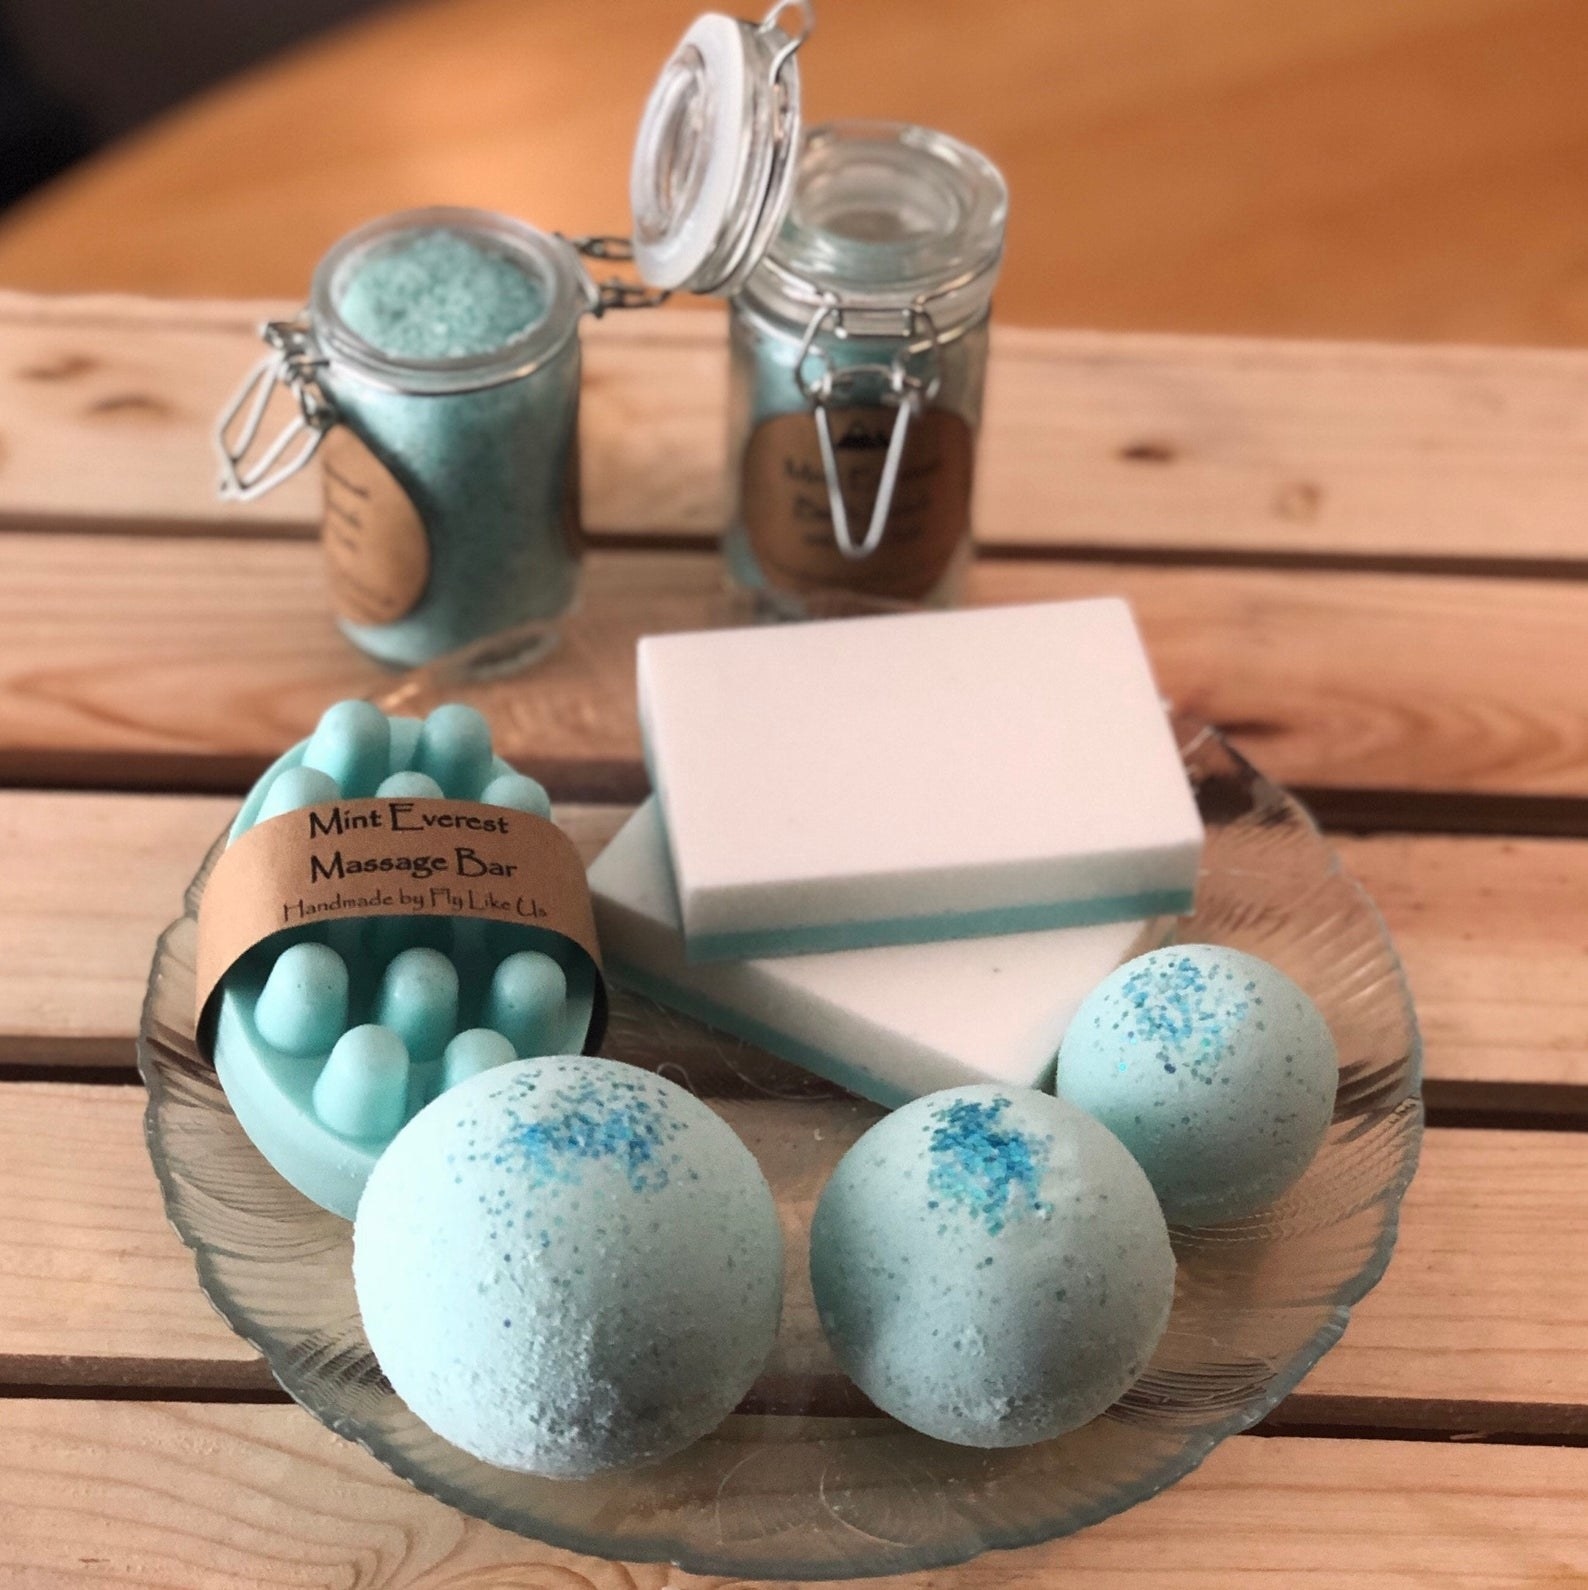 The different styles of soaps and bath bombs in a light blue color 